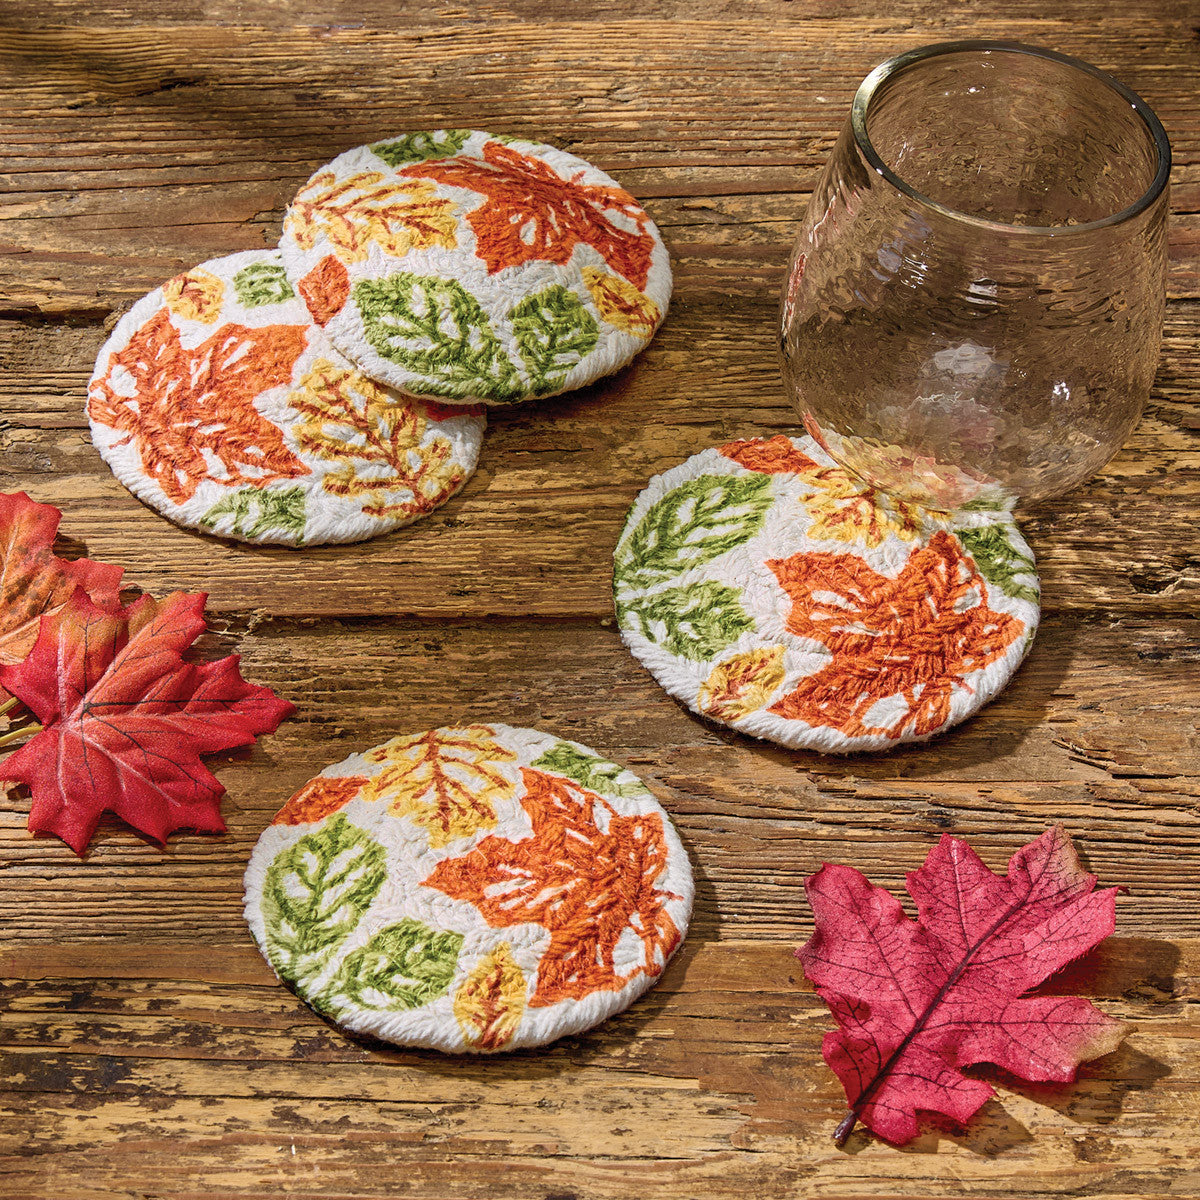 Fall Leaves Braided Coasters (Set of 4)